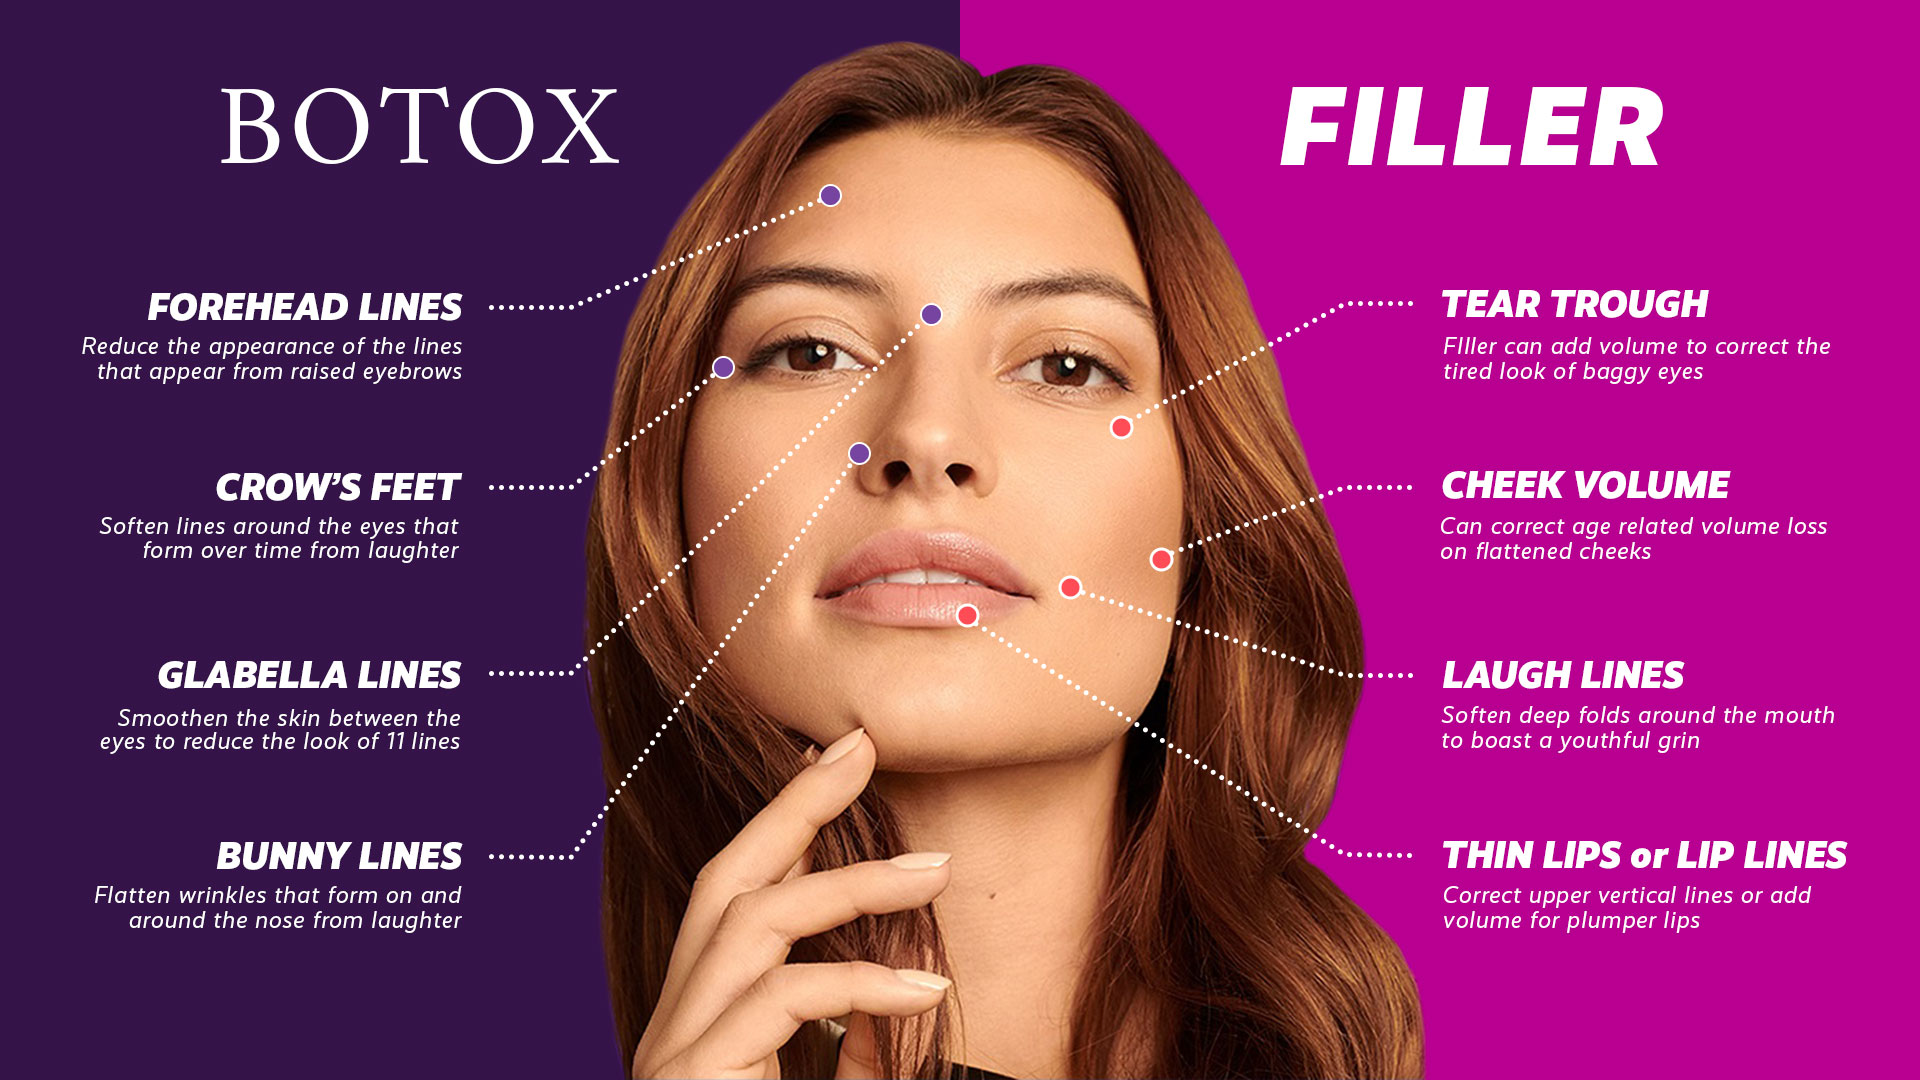 Botox for a More Youthful Appearance